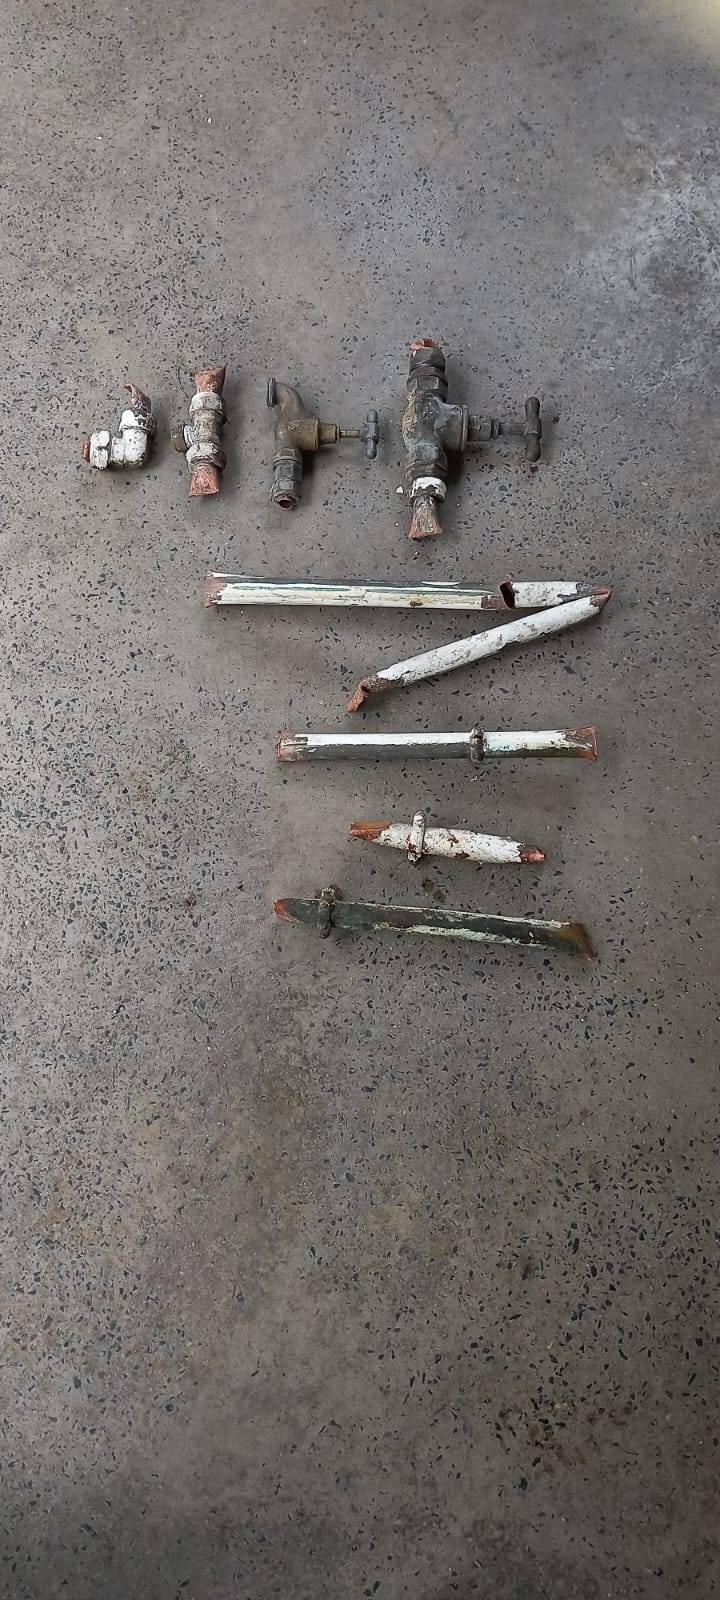 Malvern police arrested a suspect for stealing copper pipes from a building that belongs to Prasa